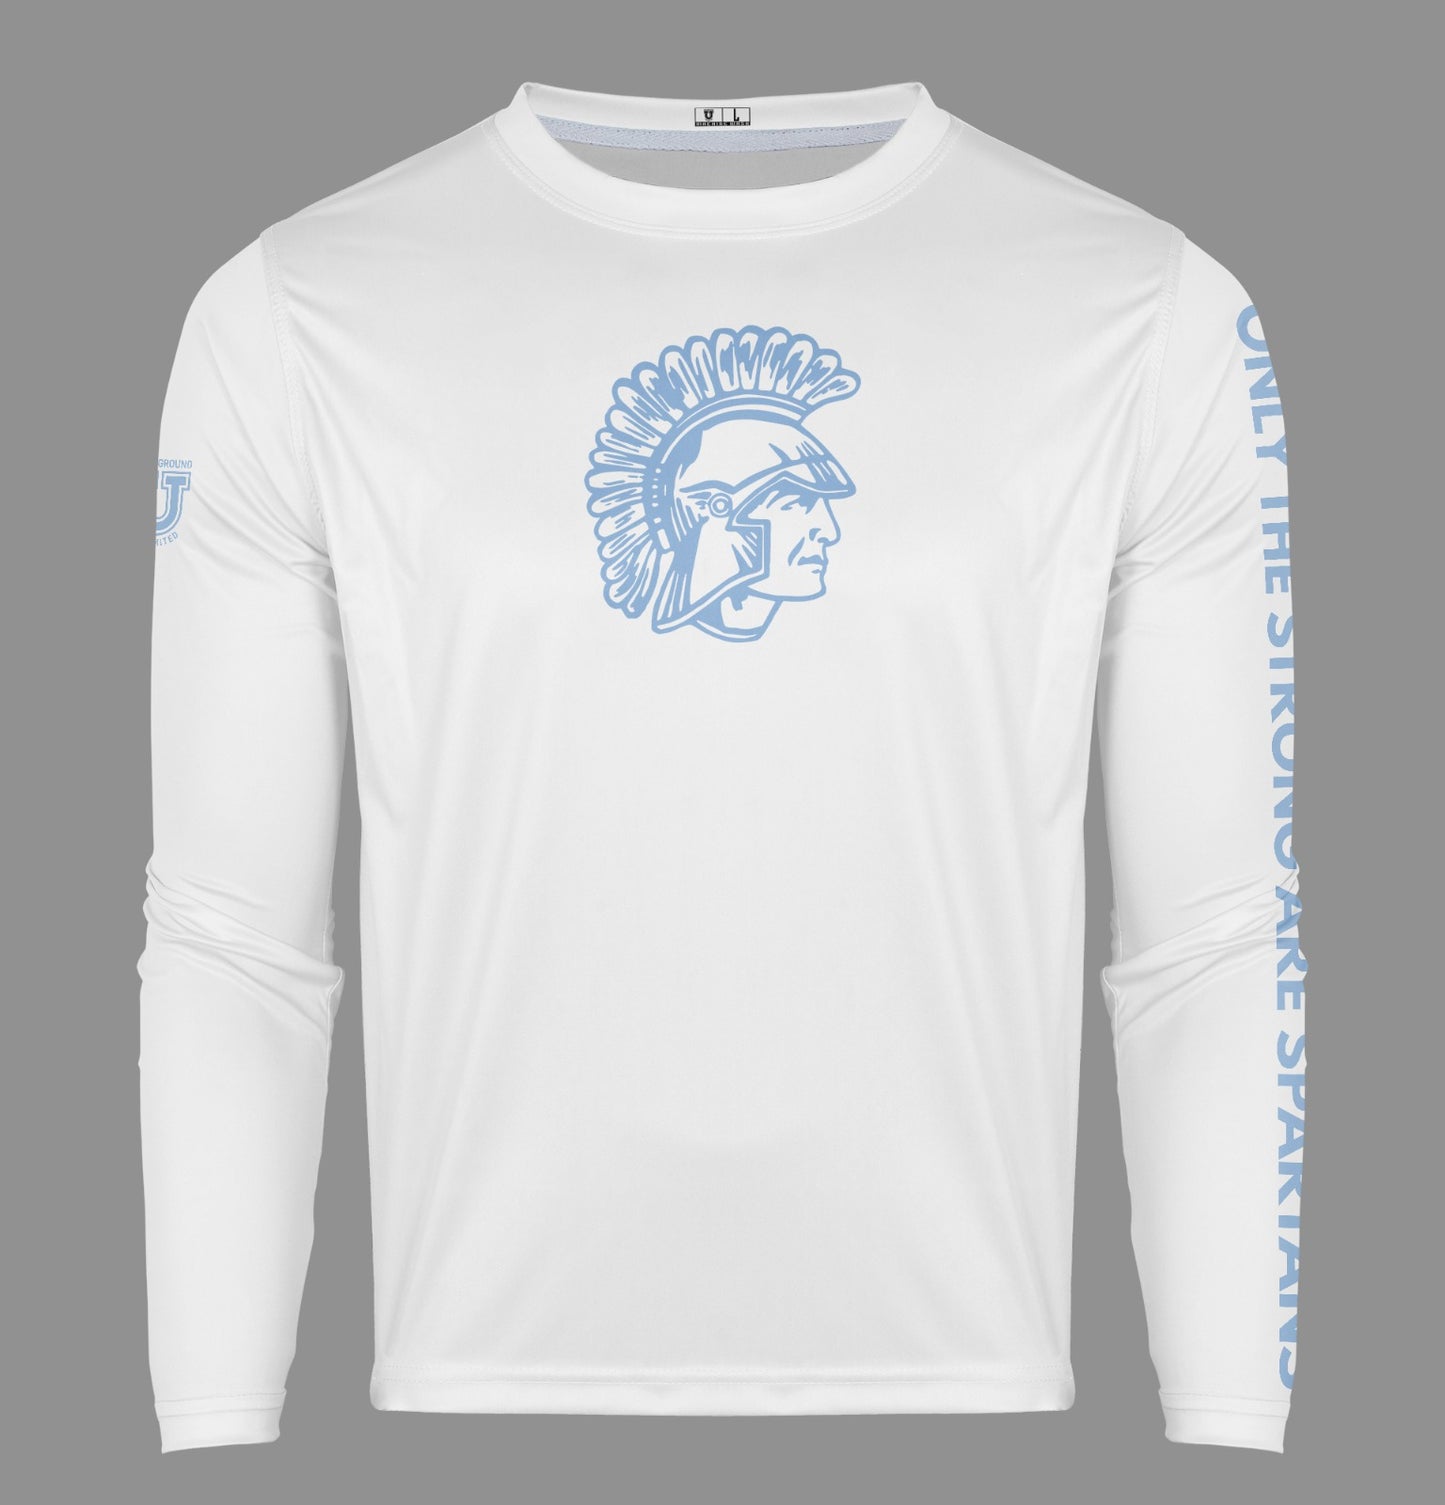 W.T. Chipman Pro Performance Sun Long Sleeve ~ Spartan White "Only the Strong are Spartans"